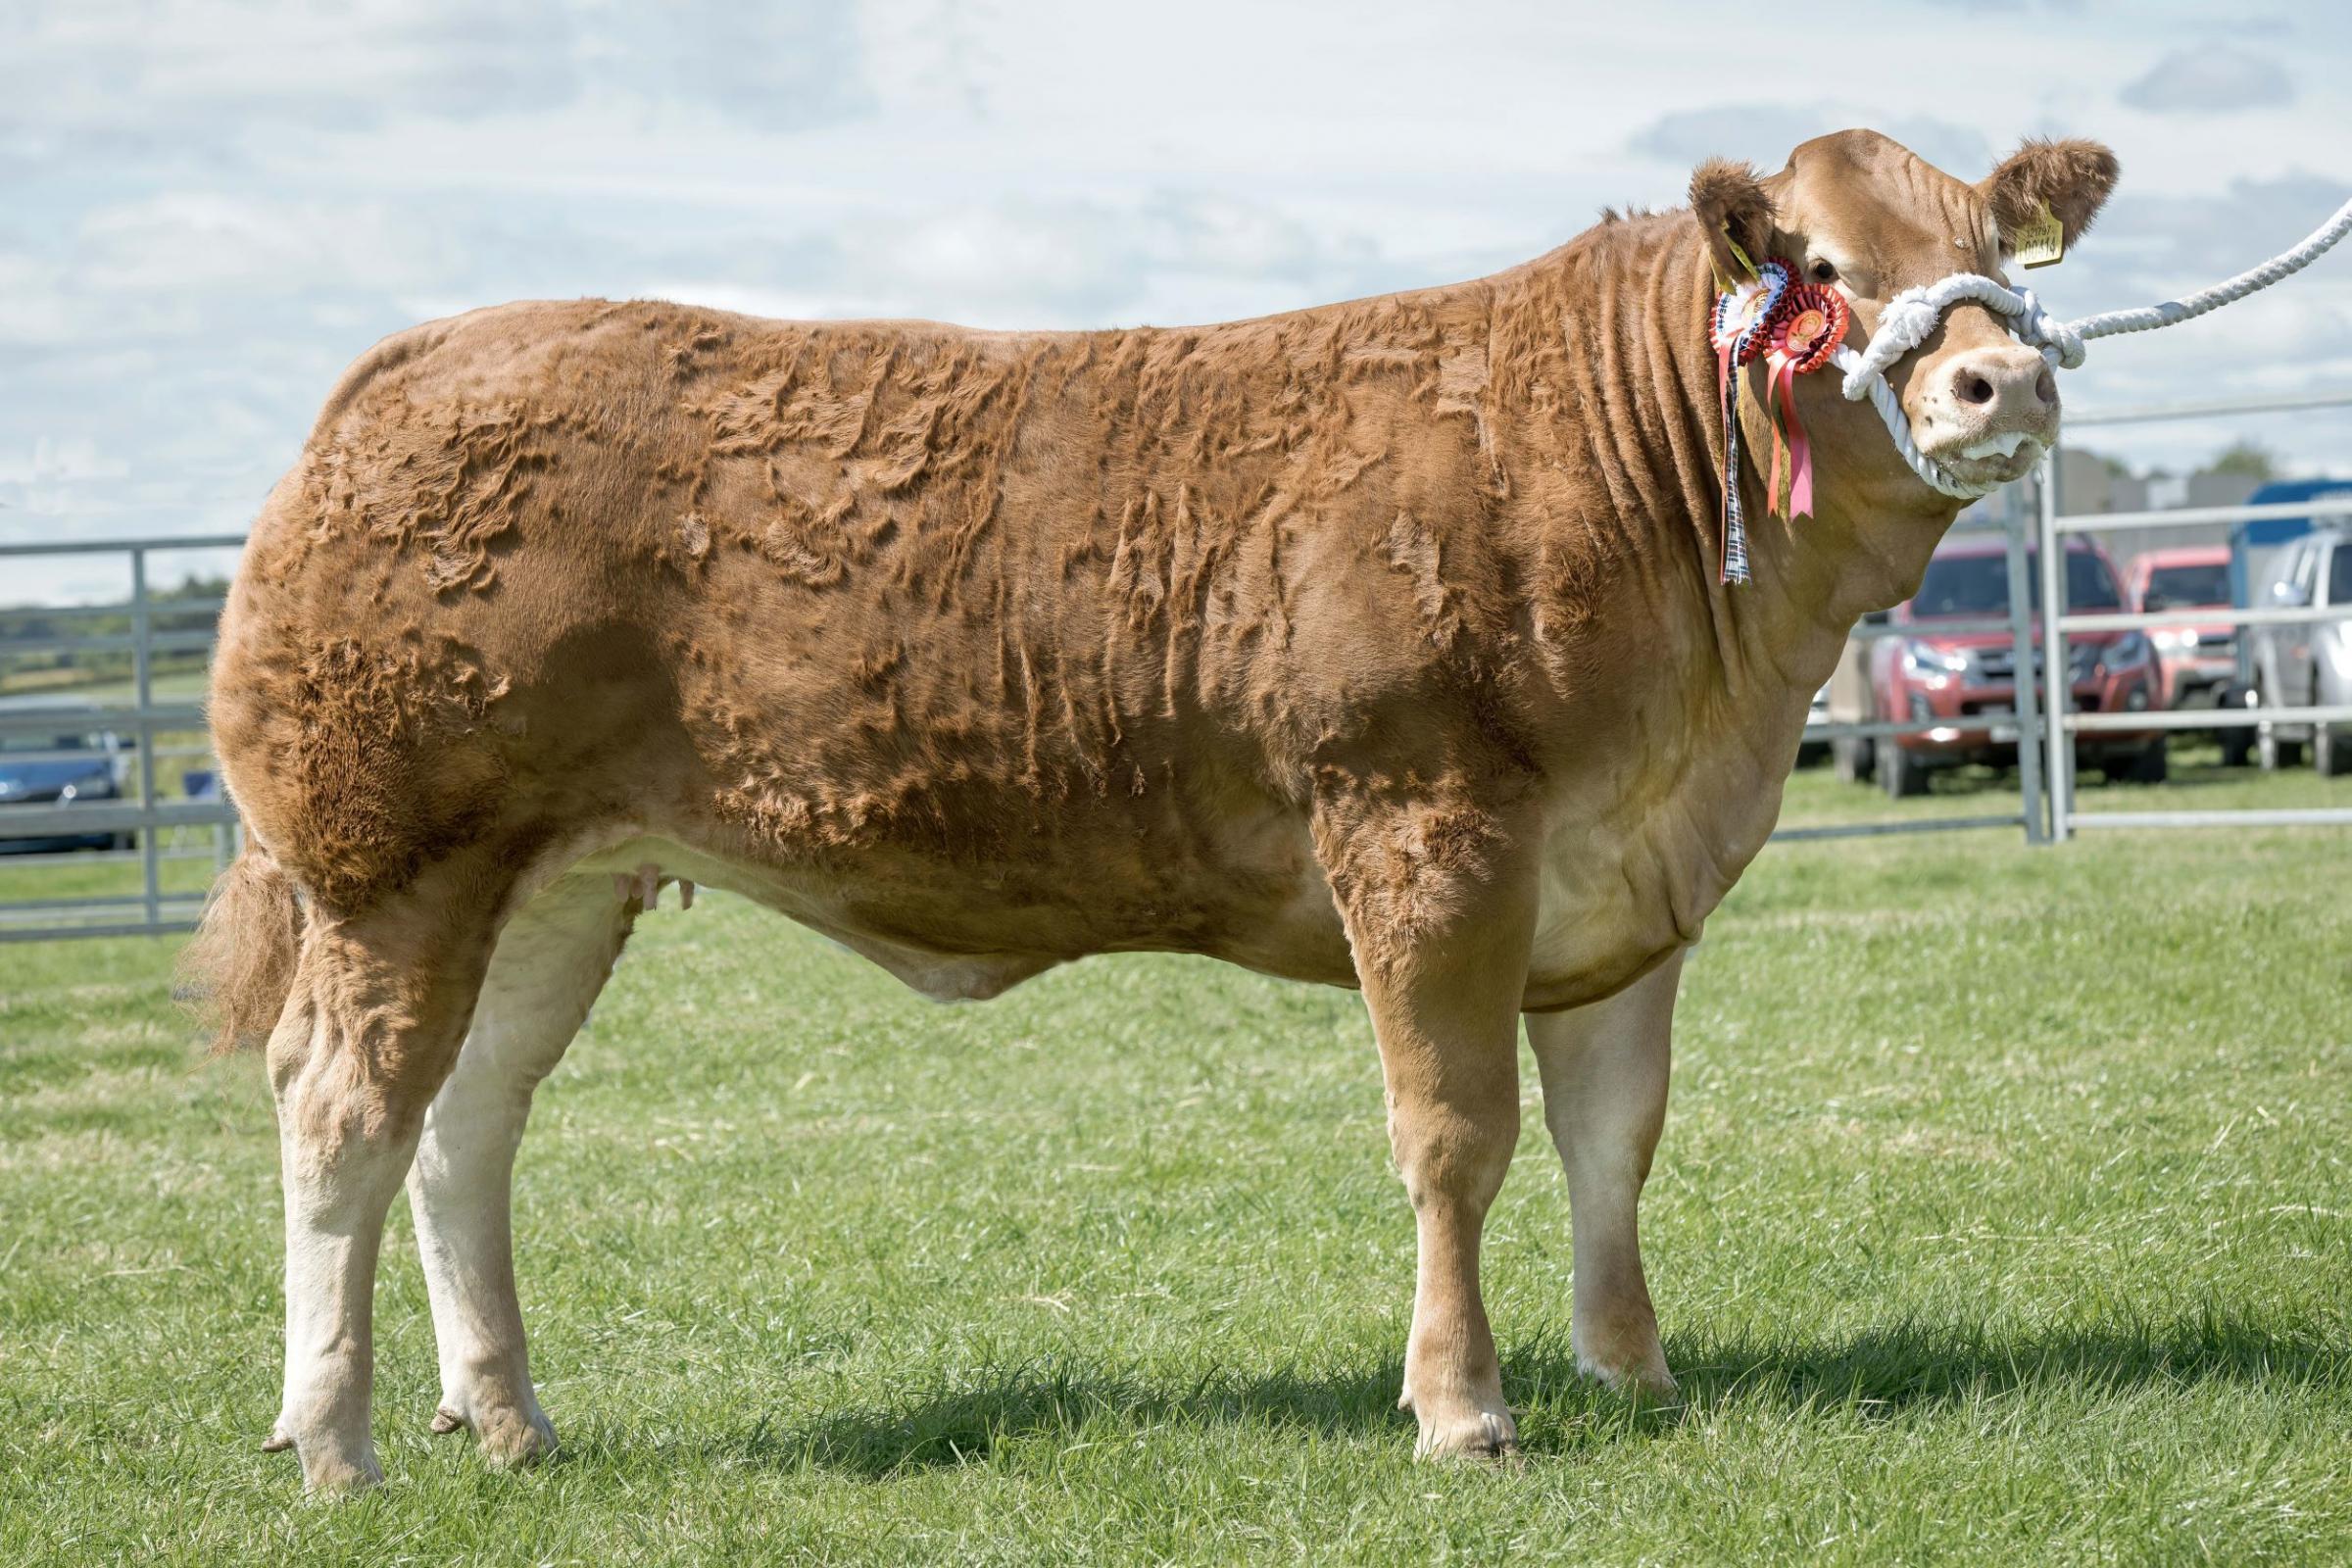 Wilson Peters commercial champion, Daisy Duke was inter-breed cattle champion